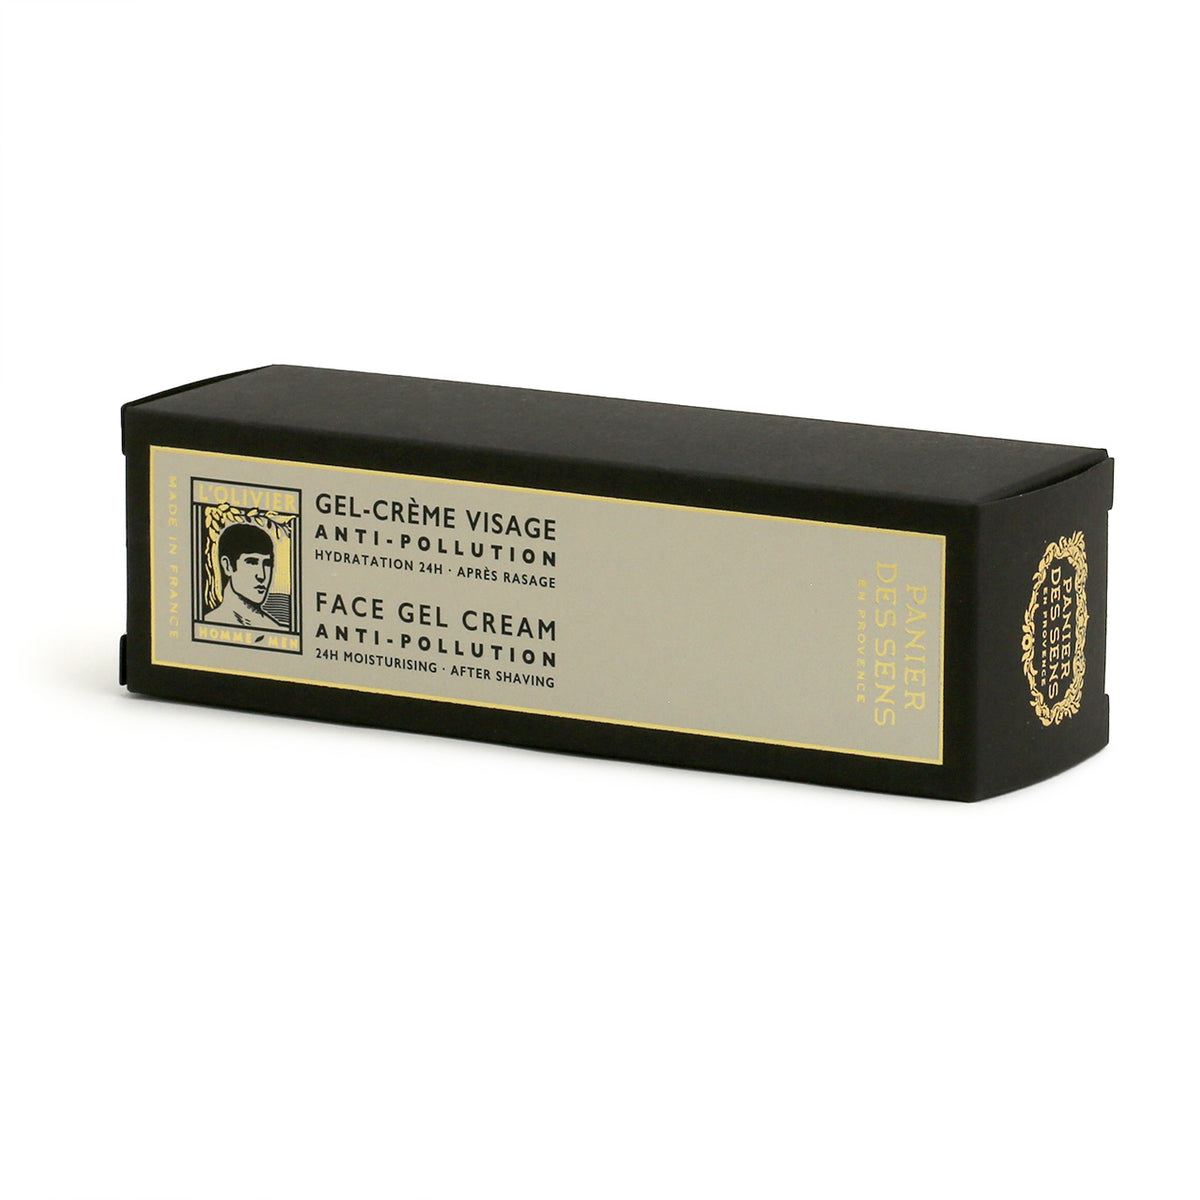 Packaging for the Face Gel Cream - black box with gold, cream and black packaging